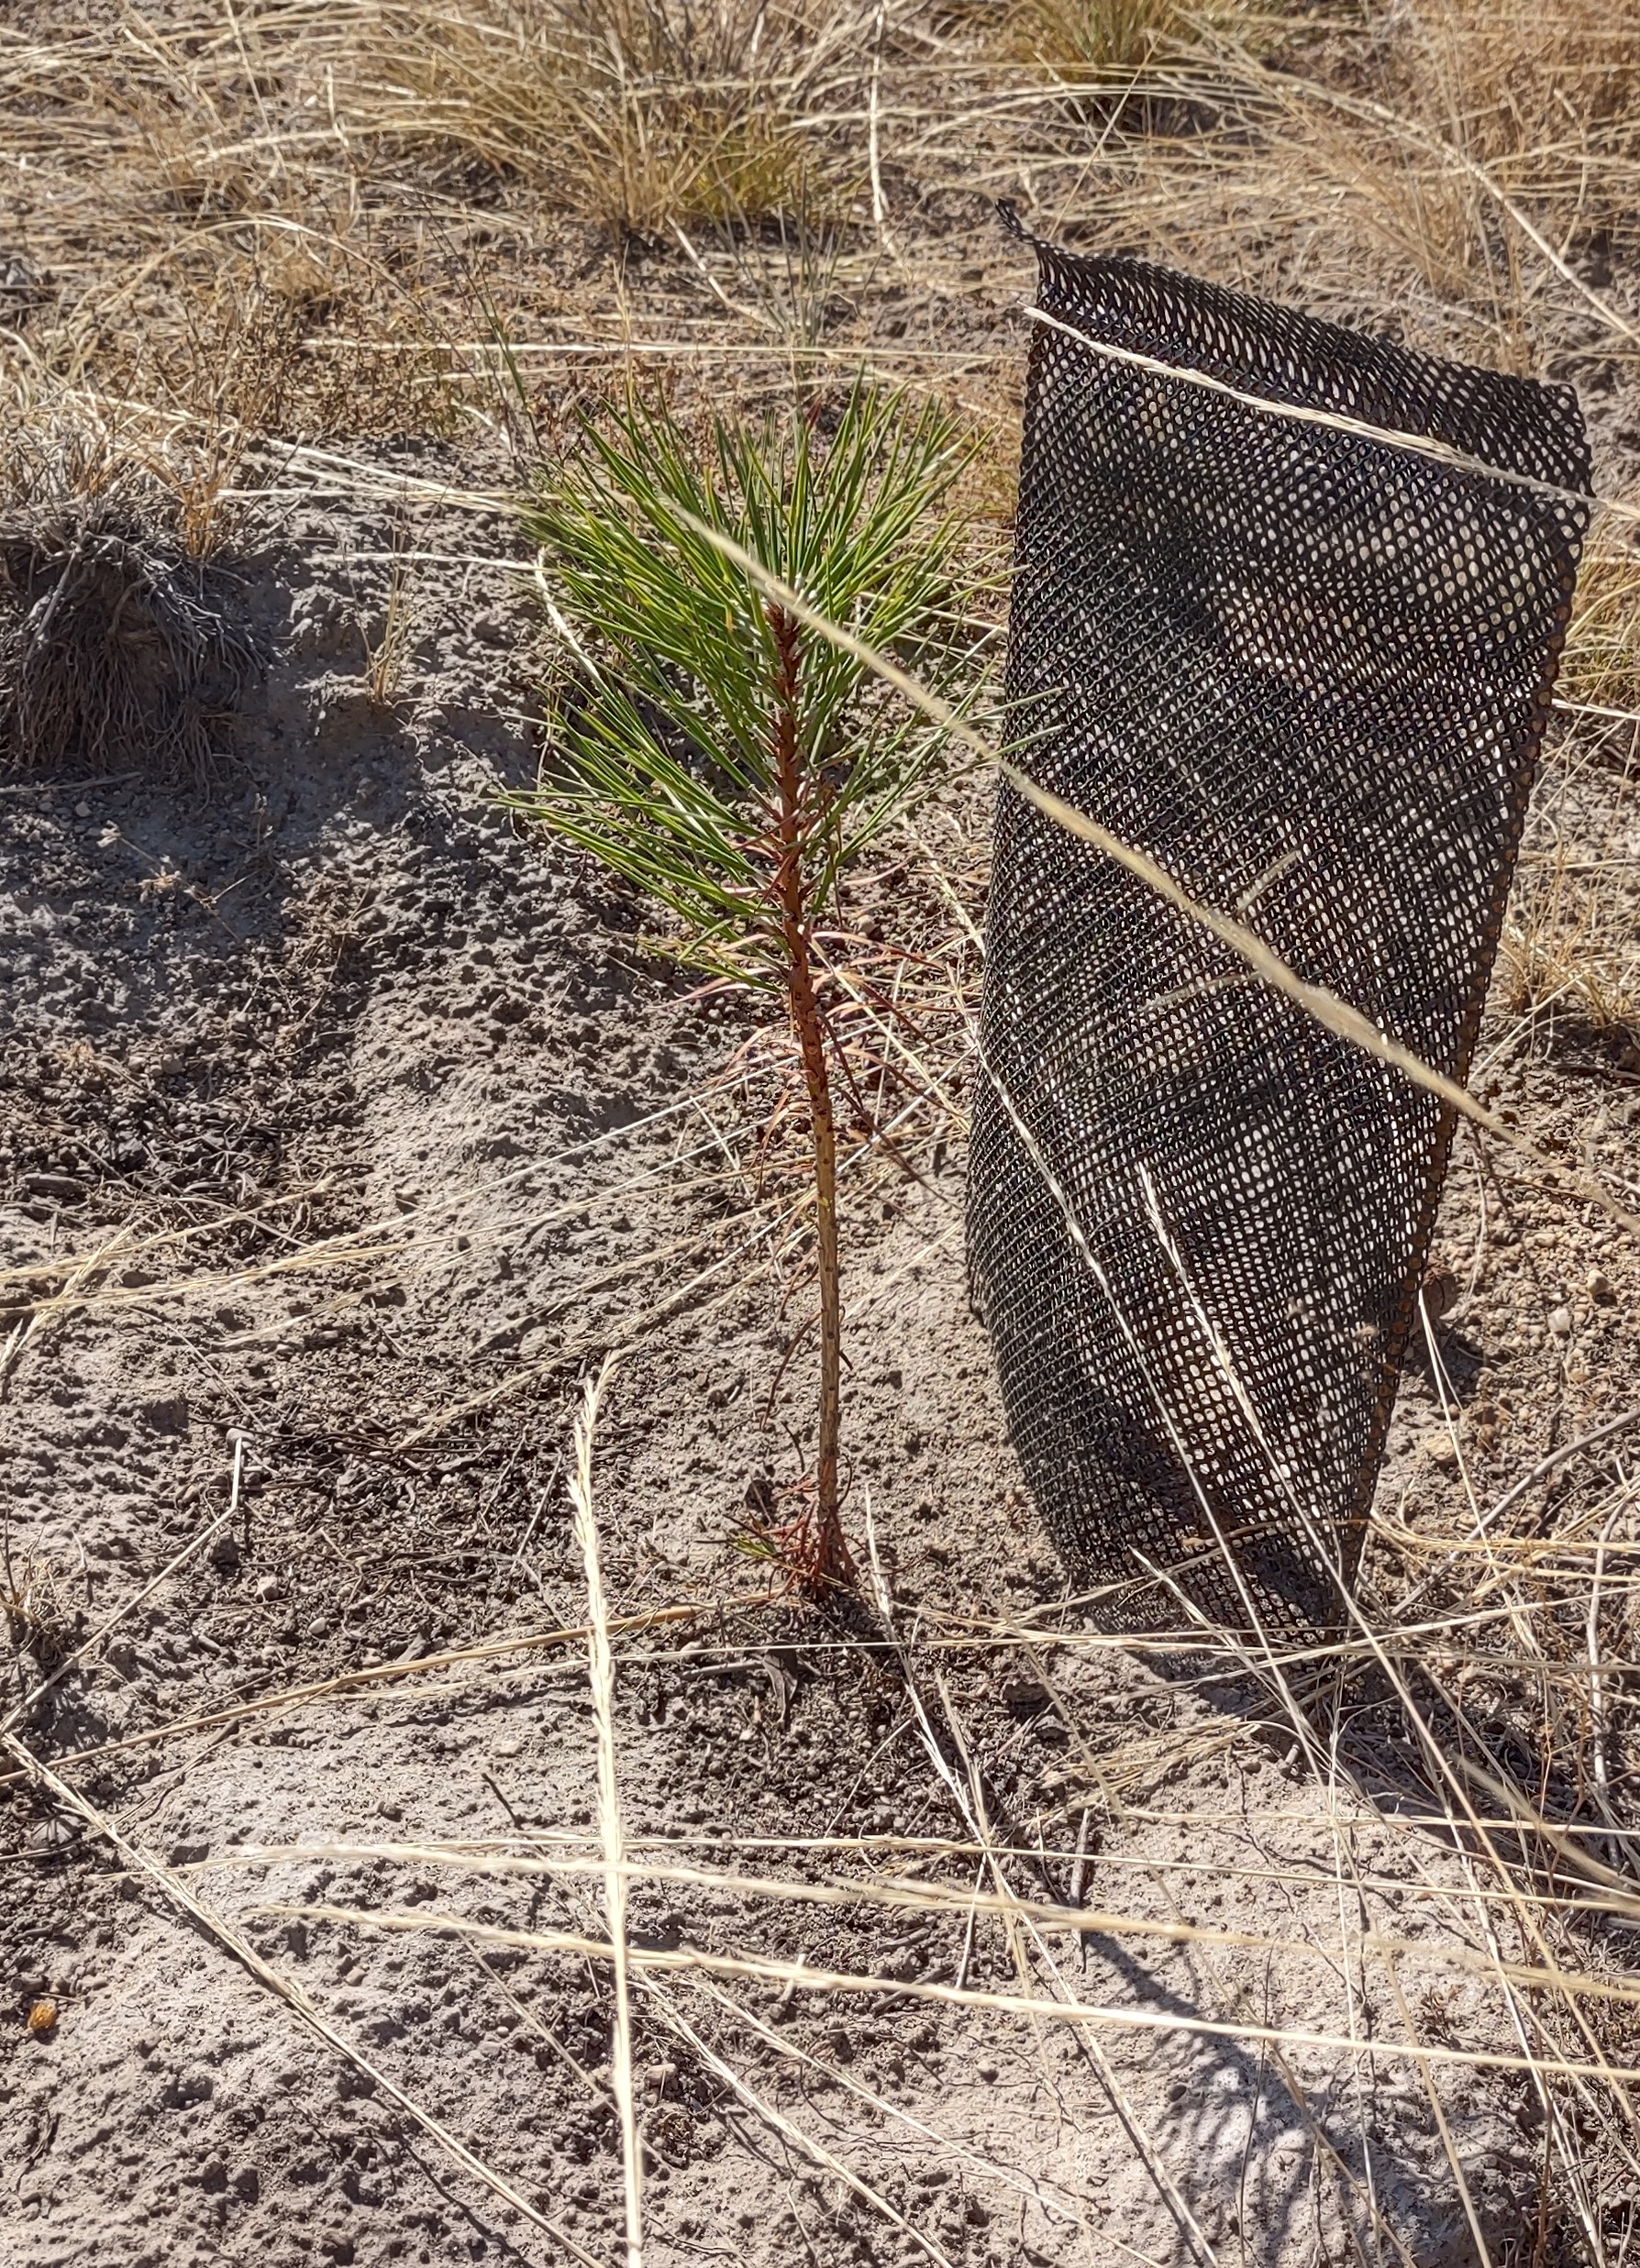 A shade cloth protects a ponderosa seedling from high sun and heat at the Carleton site.